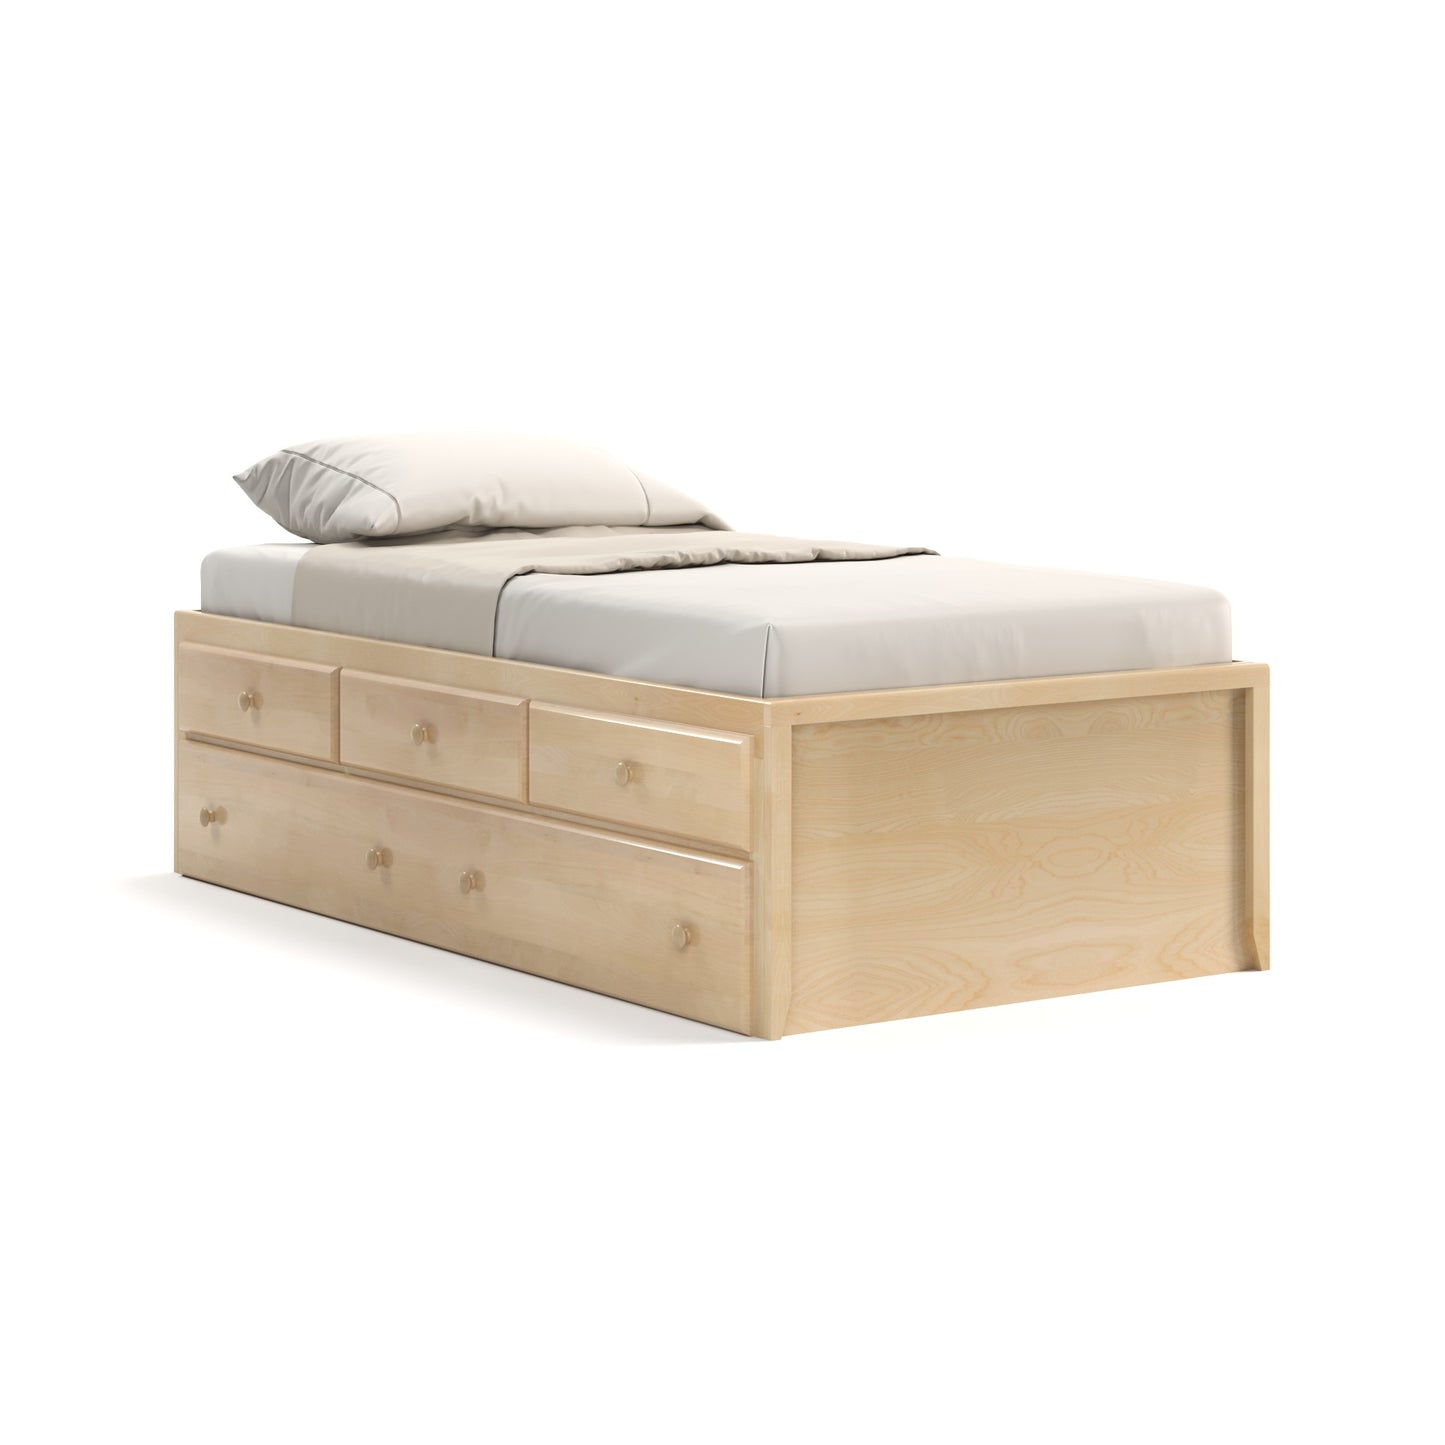 Acadia Shaker Storage Trundle Bed with three drawers. Features three storage drawers and a roll out trundle for an additional mattress. Shown in Natural Finish.